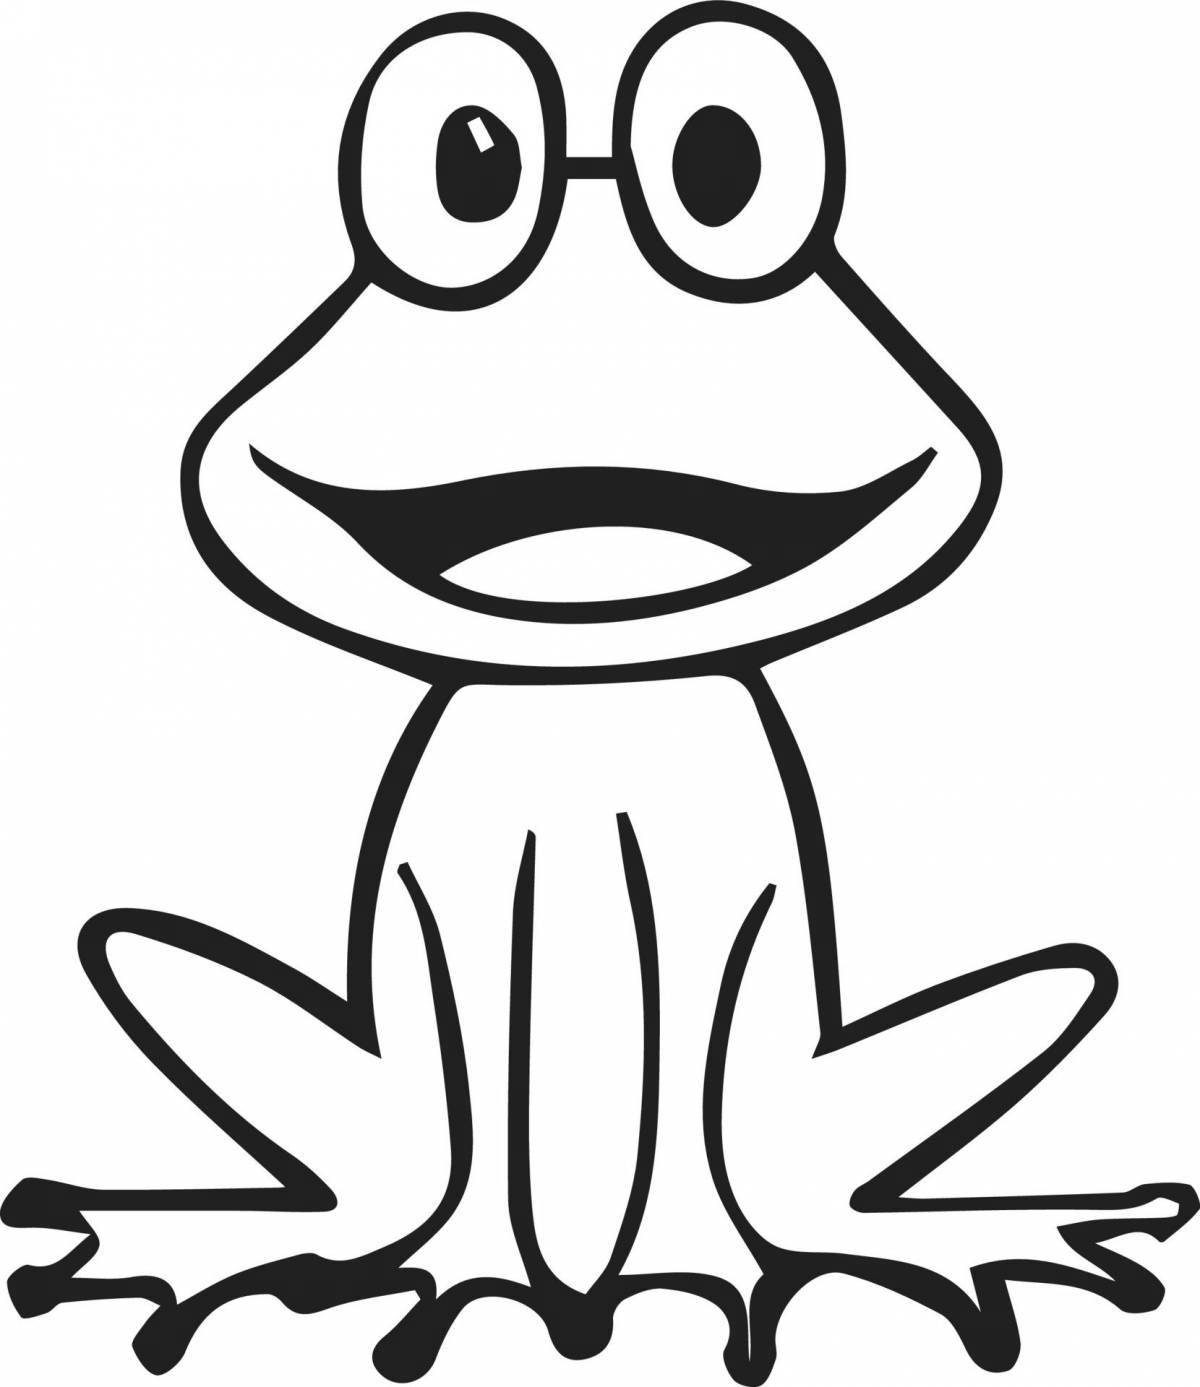 Colourful frog coloring book for children 3-4 years old